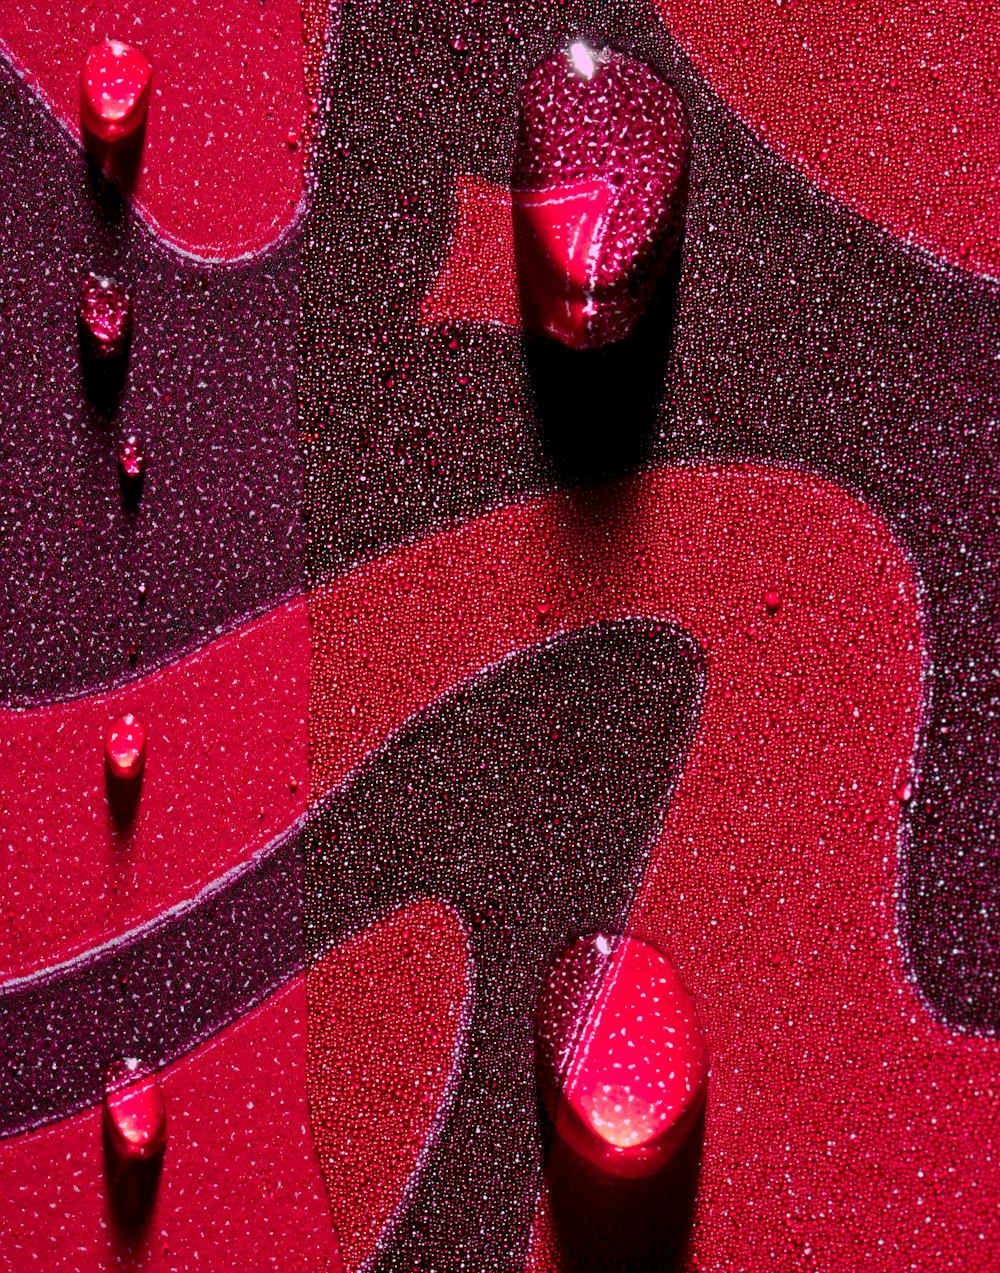 a close up of a red and black surface with drops of water on it